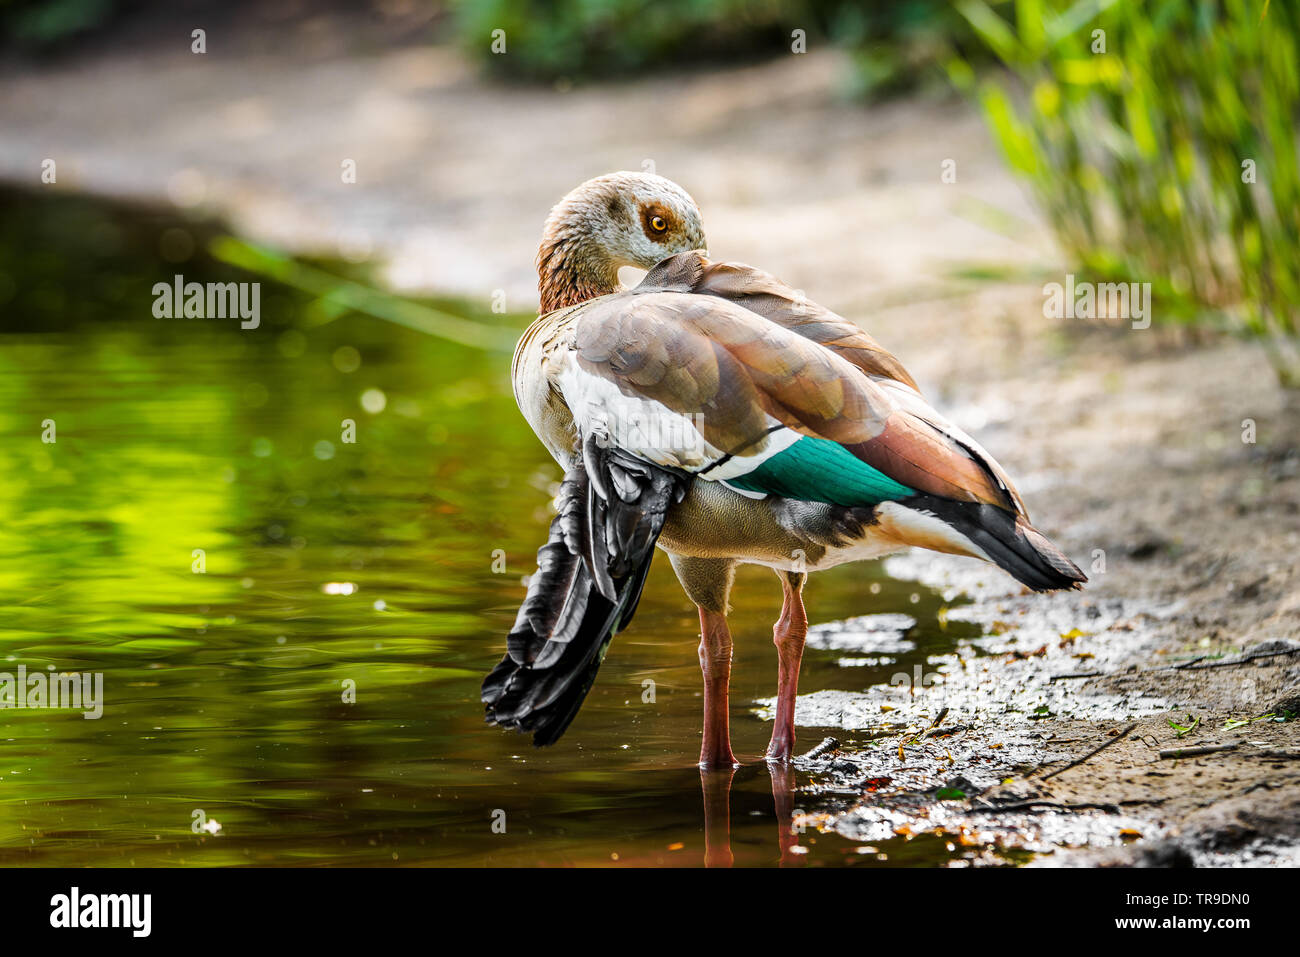 Egyptian Goose with 'angel wing,' a physical deformity often caused by poor diet, such as being fed too much bread. Stock Photo